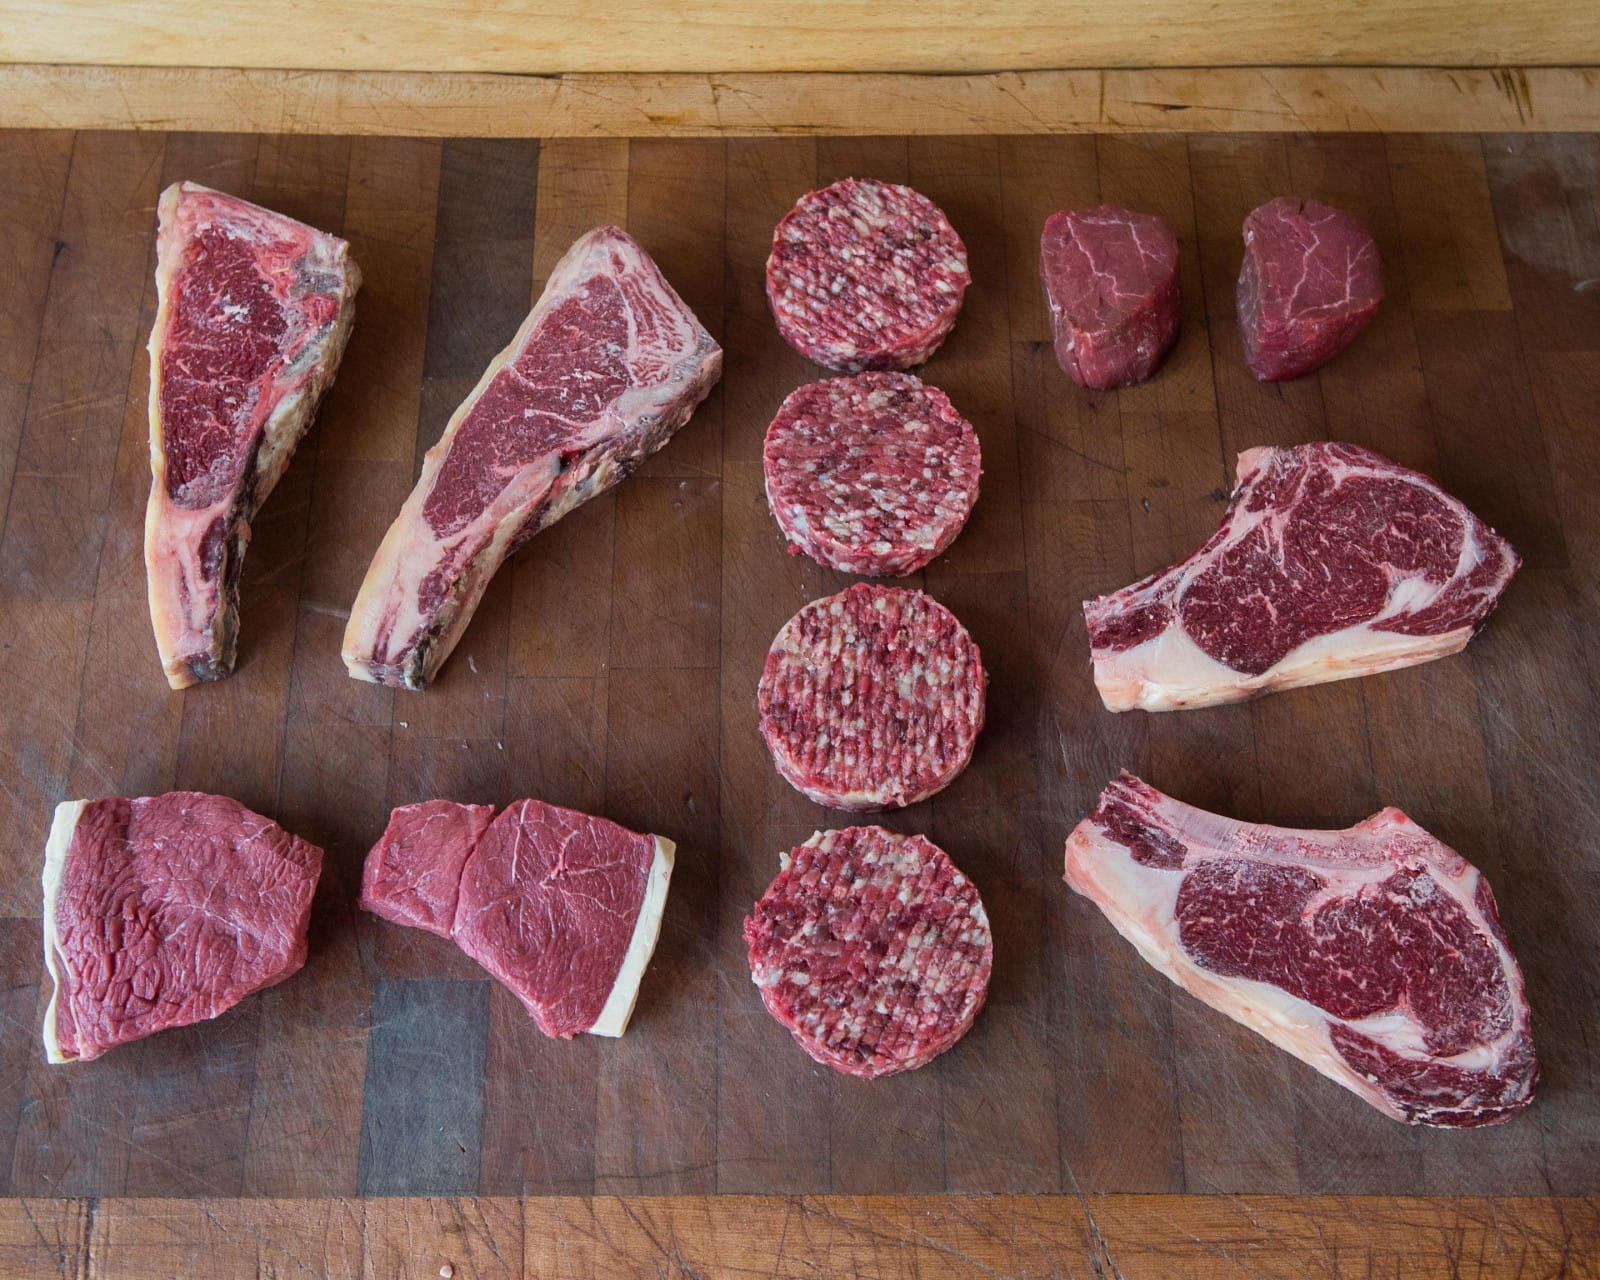 Win an aged Spanish beef meat box, a bottle of Rioja gran reserva and a copy of Prime